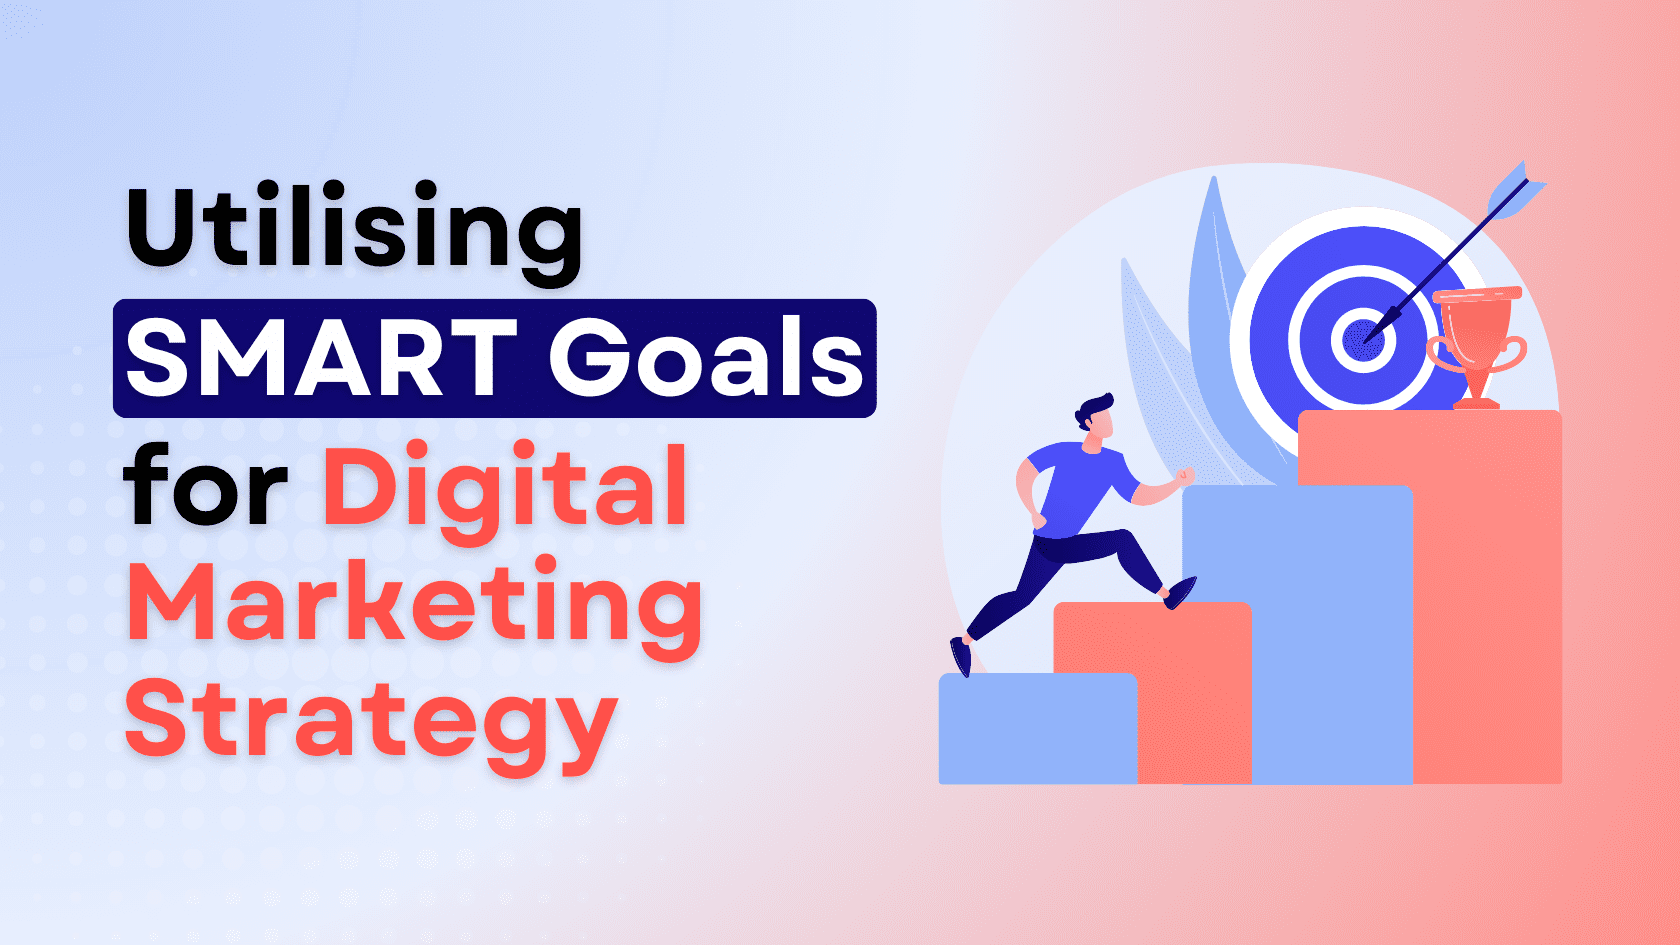 Graphic image with text 'Utilising SMART Goals for Digital Marketing Strategy' depicting a figure climbing steps towards a target, symbolizing goal-setting and achievement in digital marketing.